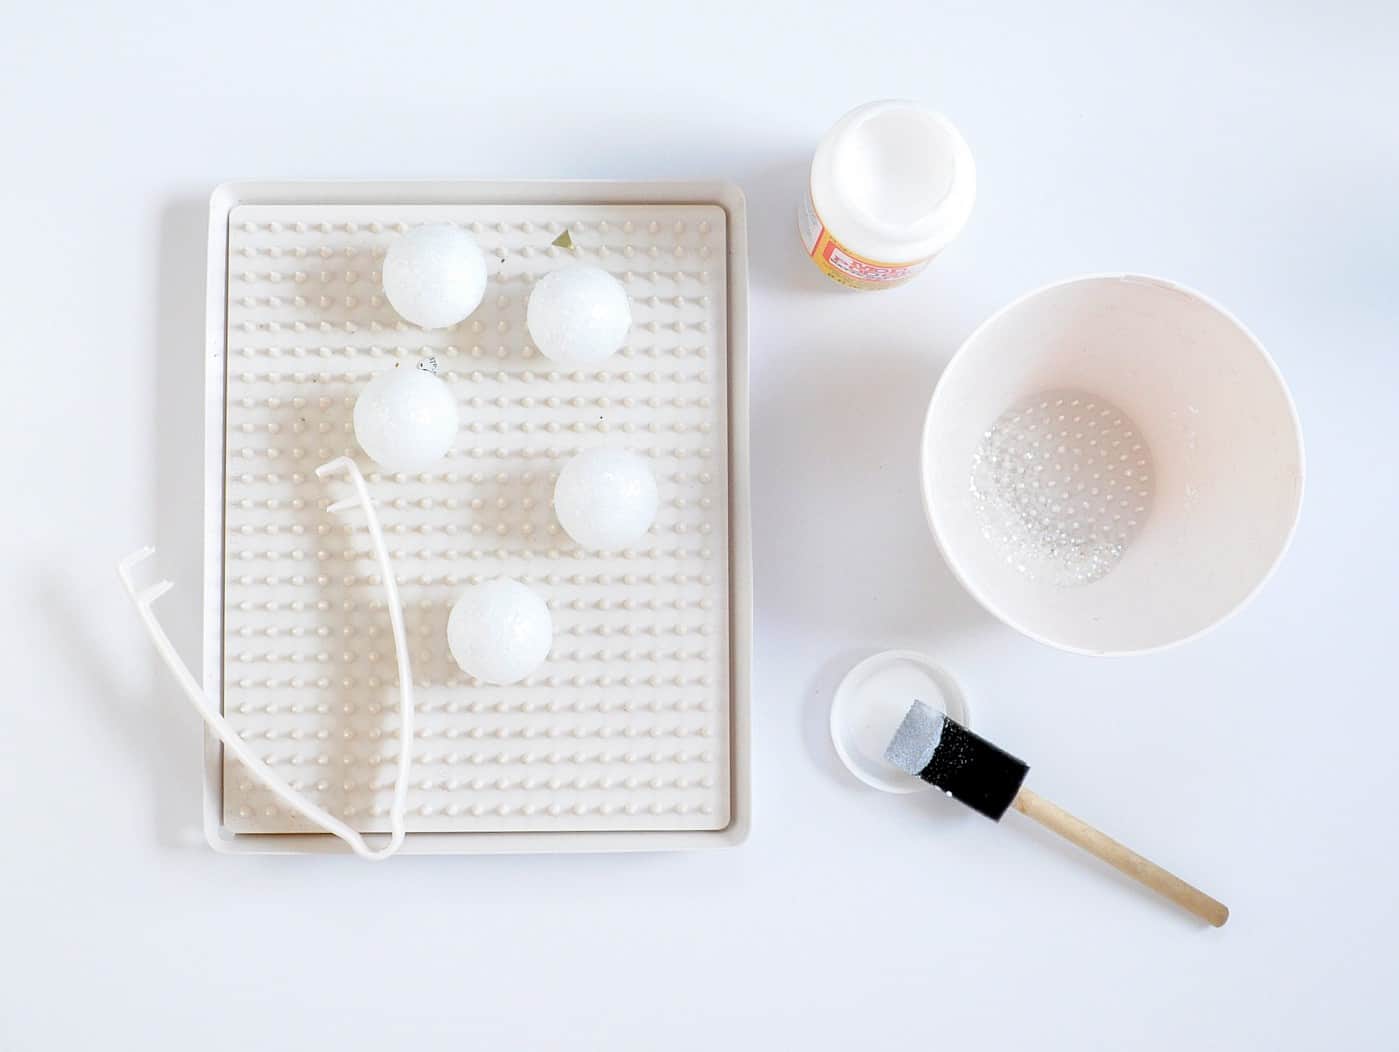 Covering ping pong balls in glitter with Mod Podge